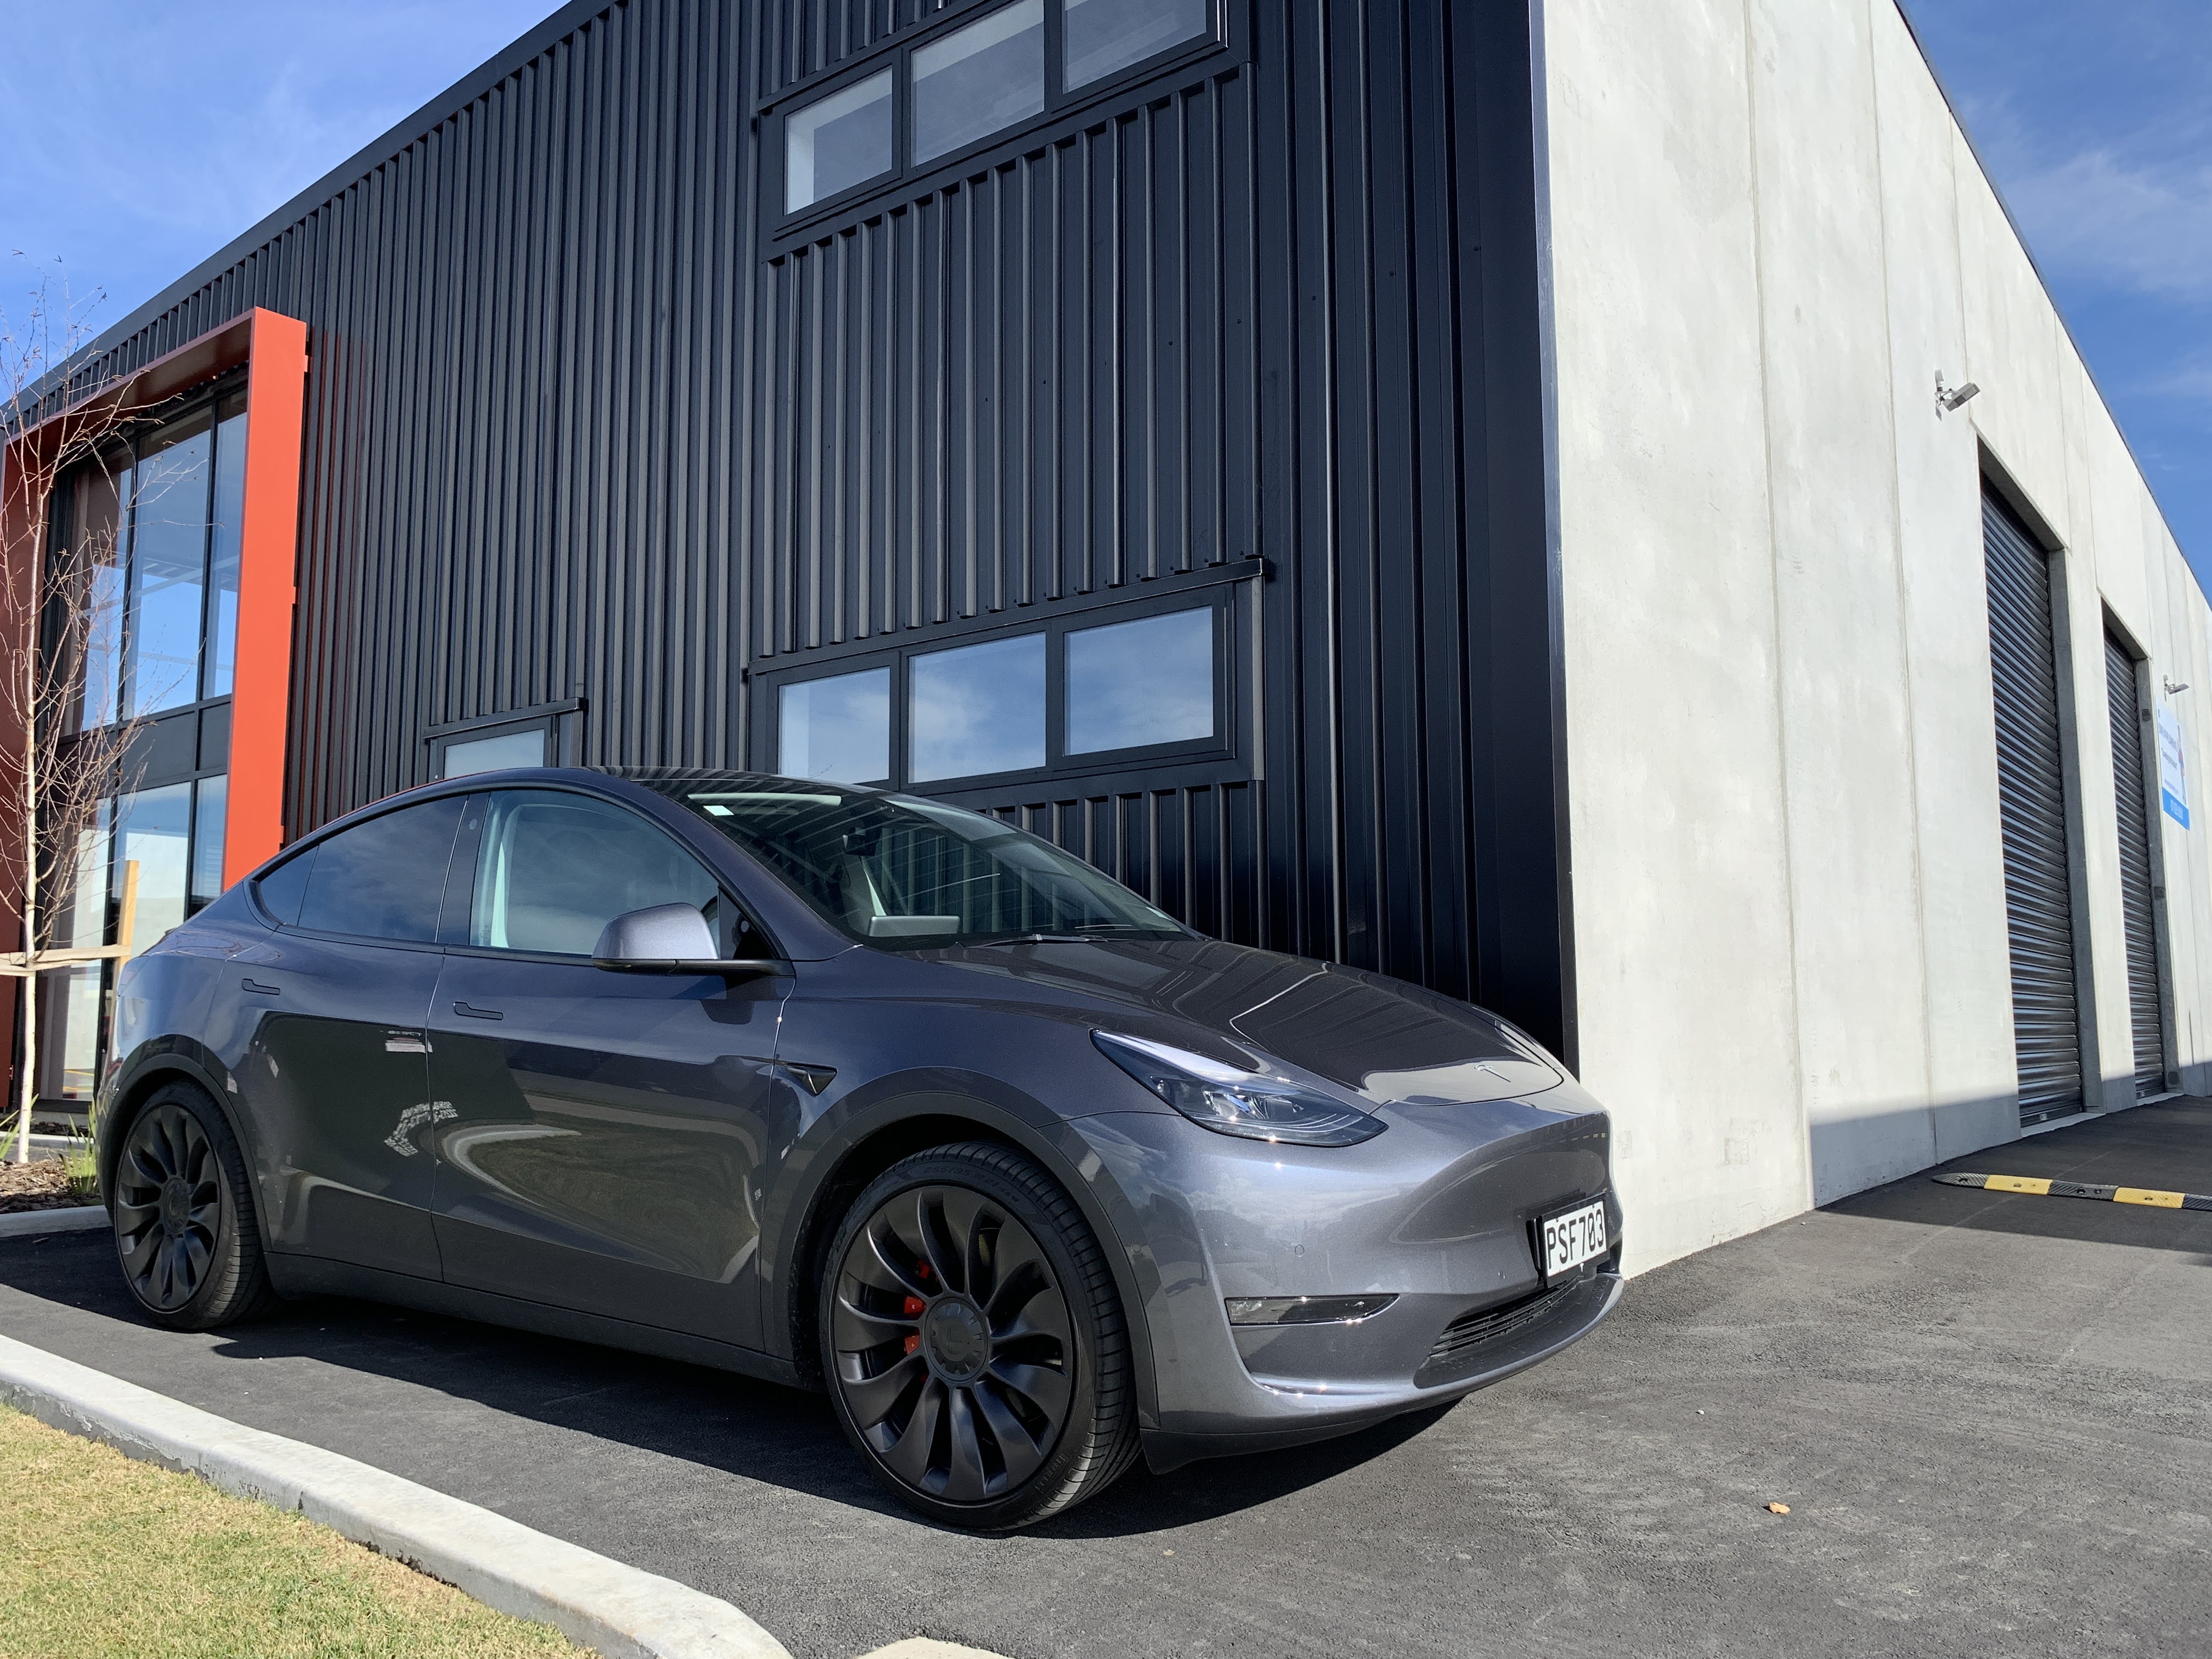 Tesla Model Y Performance review: Yes for Performance - Driven Car Guide